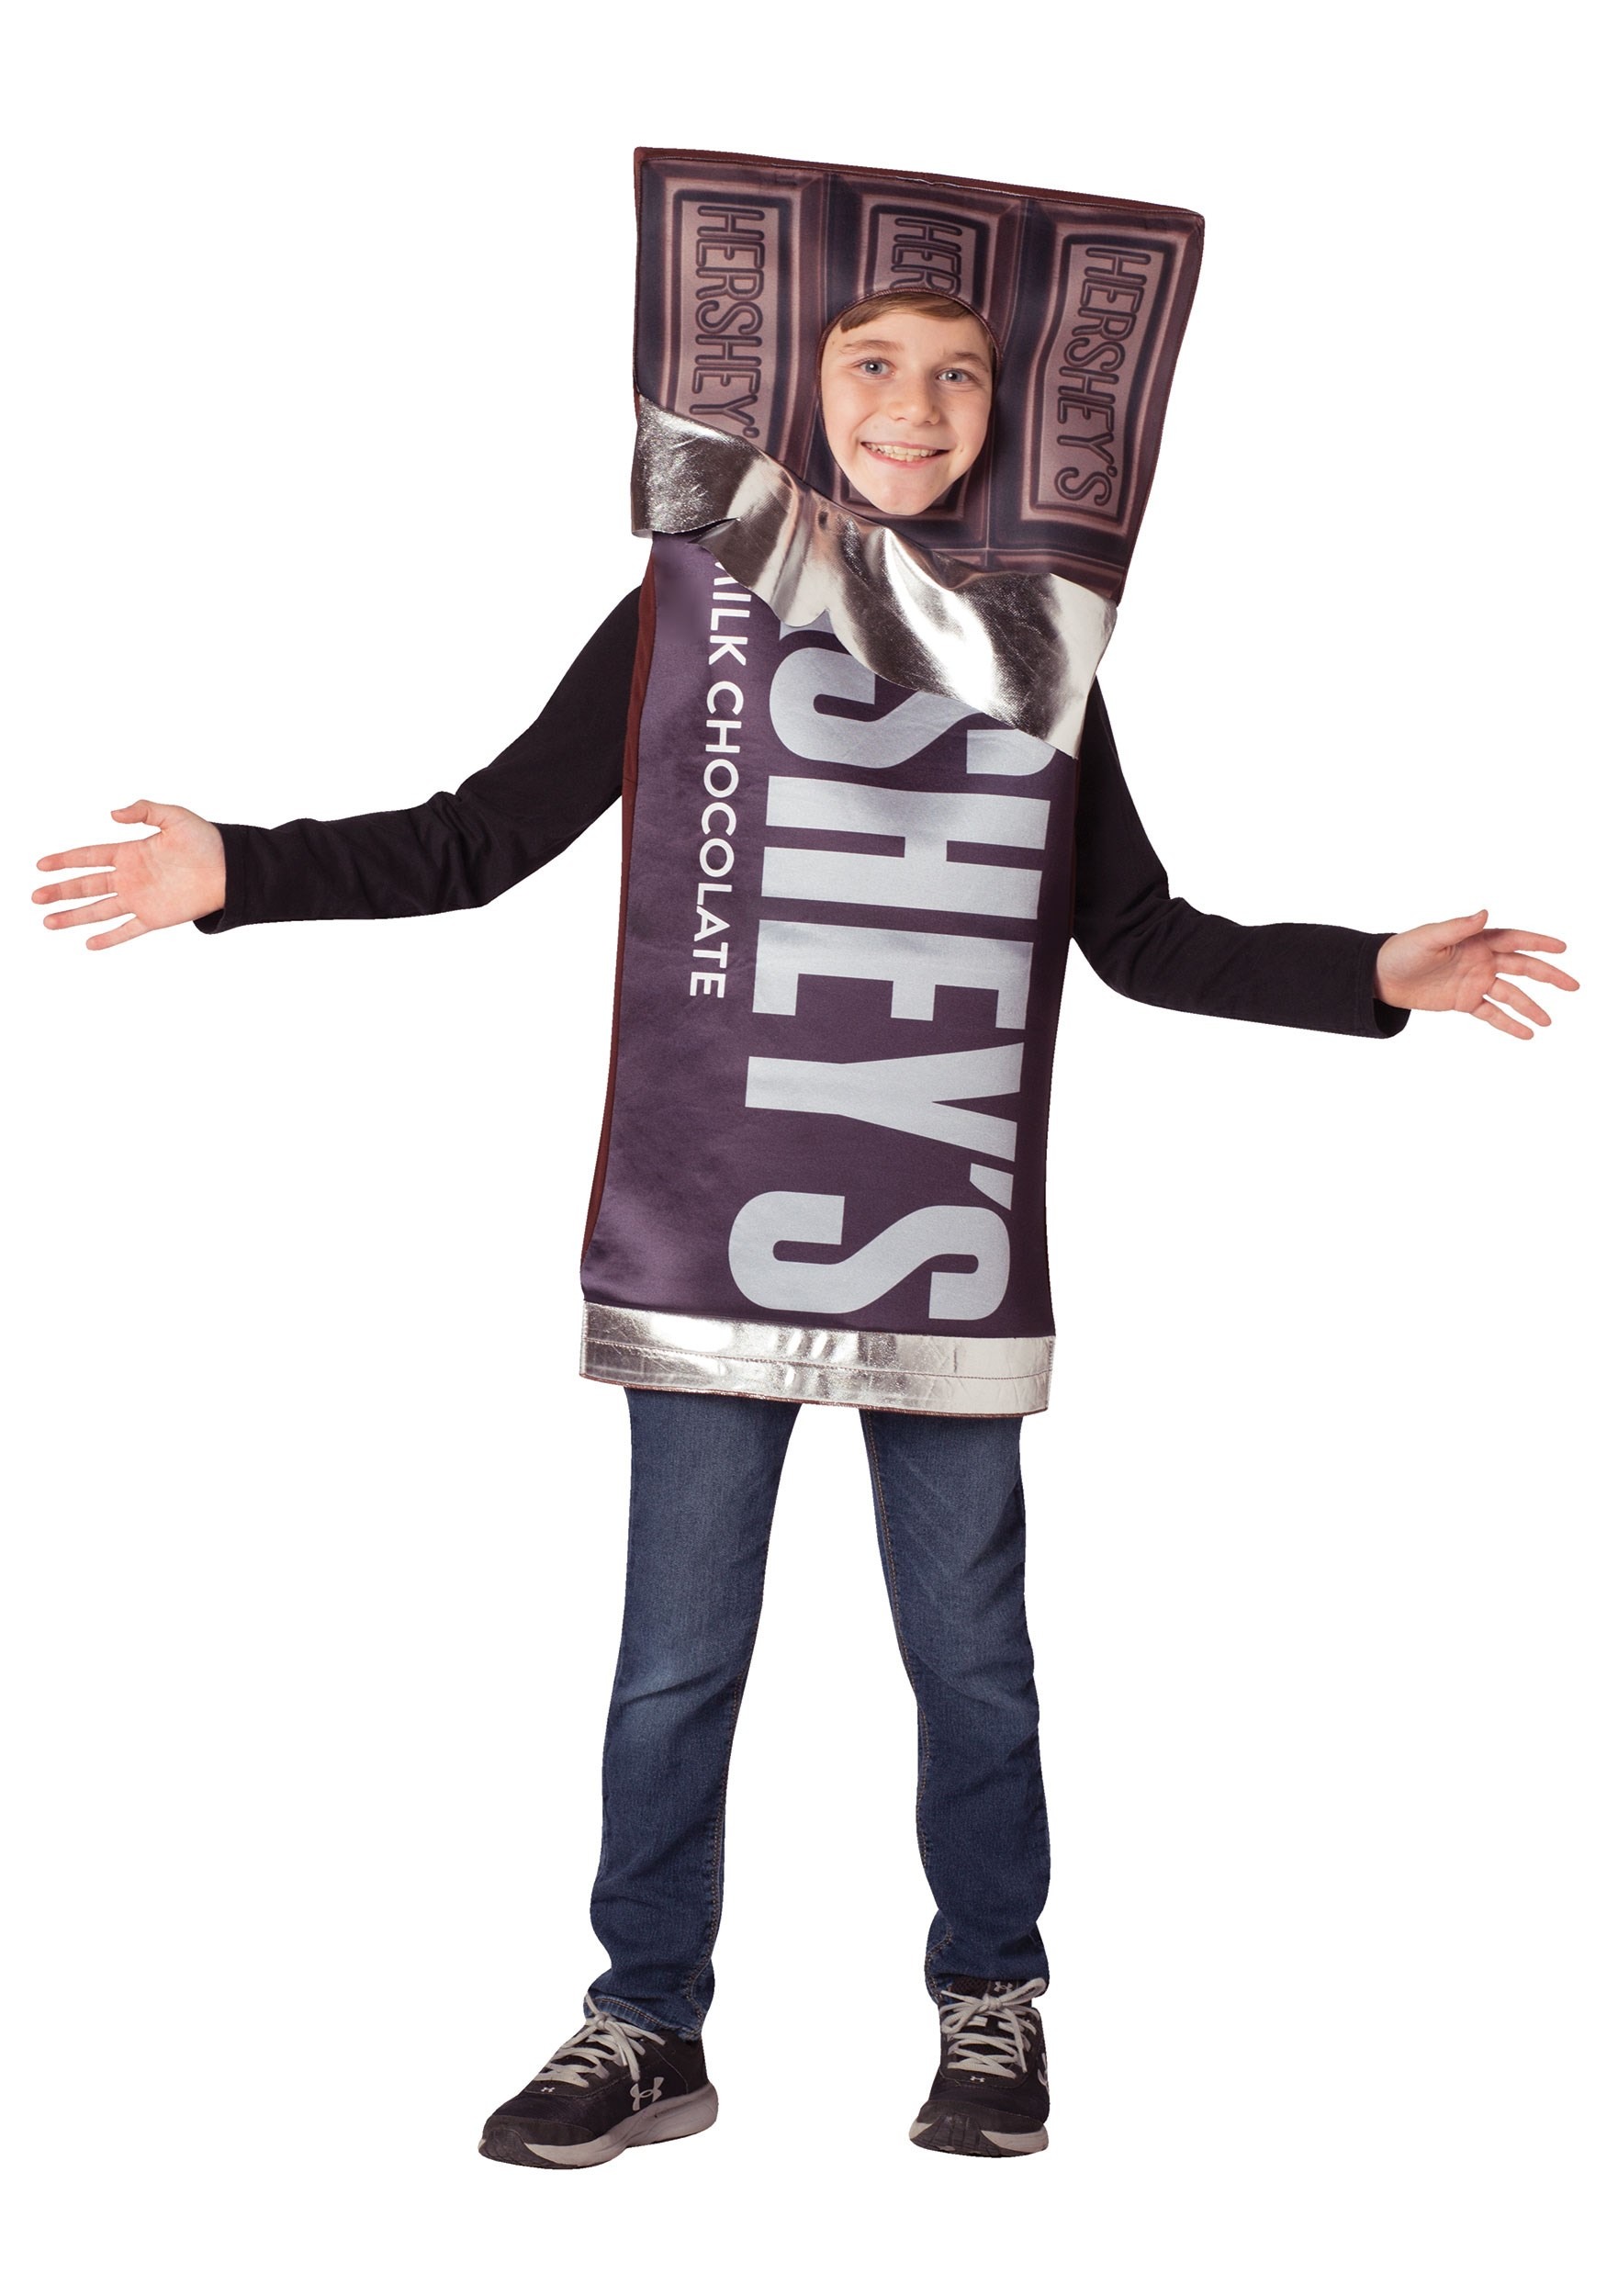 Hershey's Candy Bar Costume for Kids